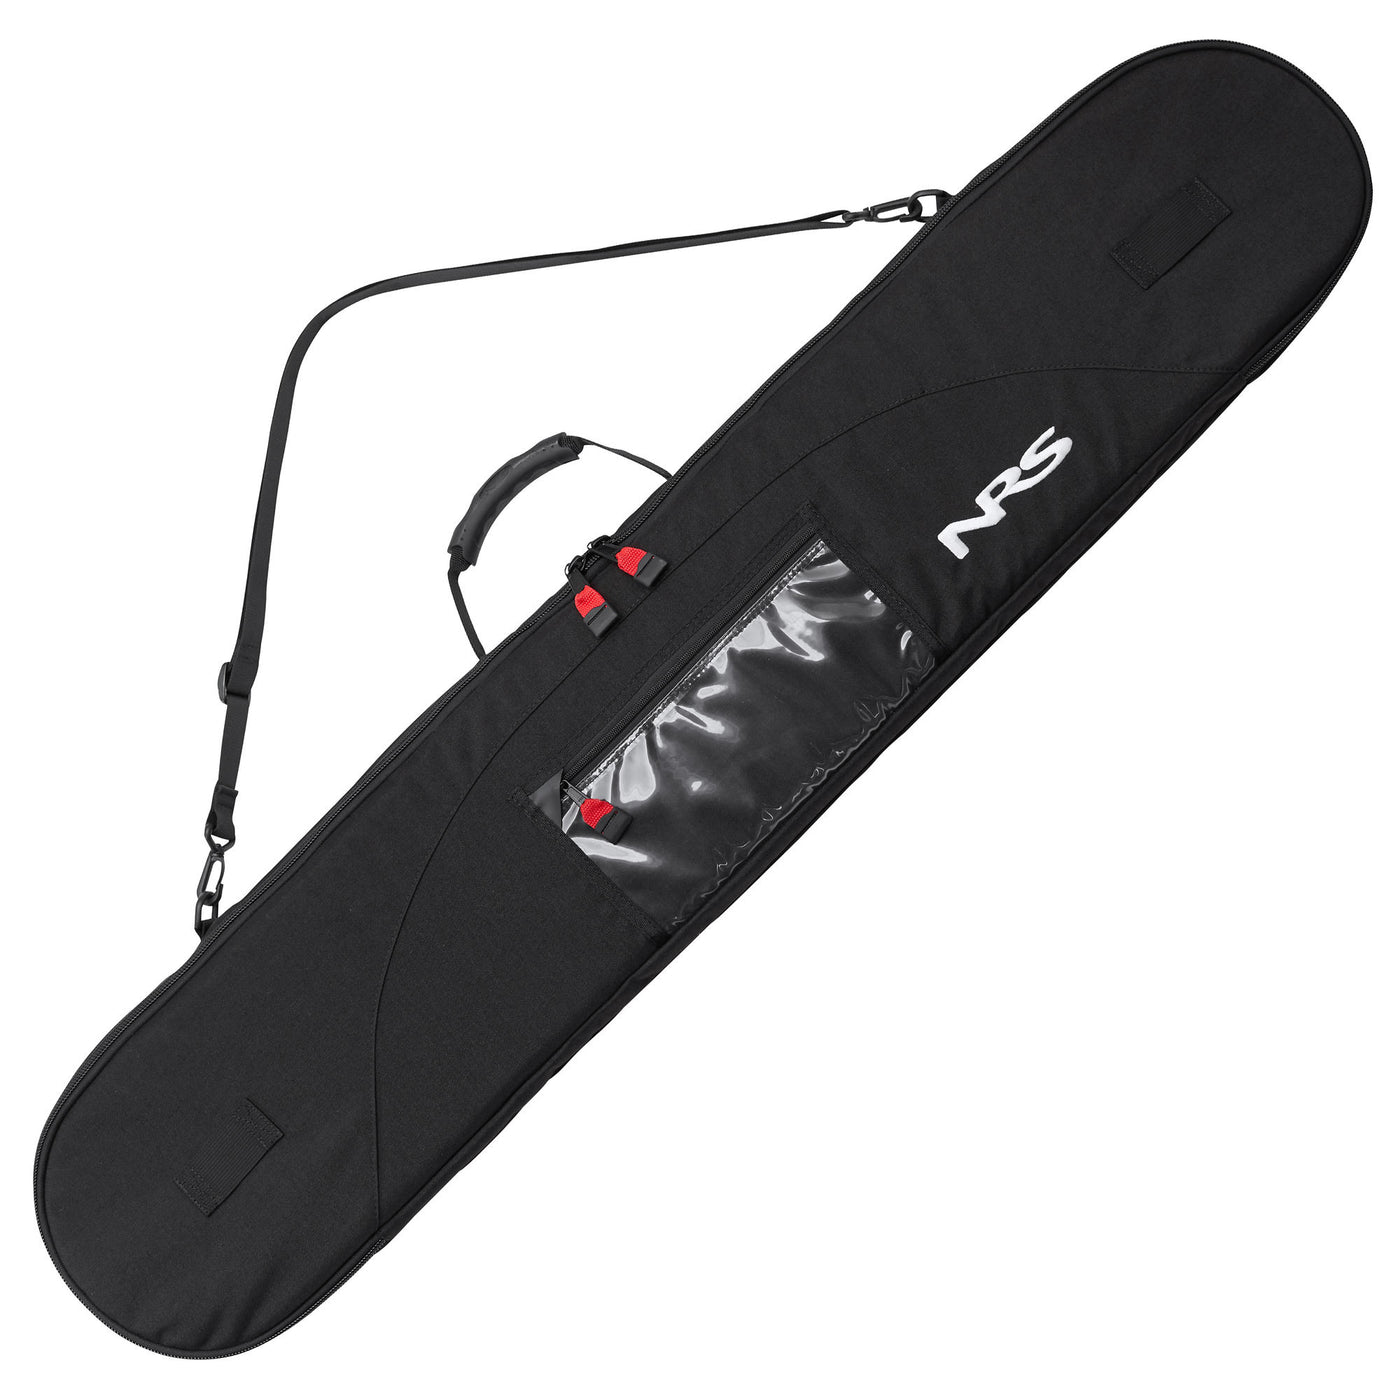 Werner 2 Piece Paddle Bag | Escape Watersports